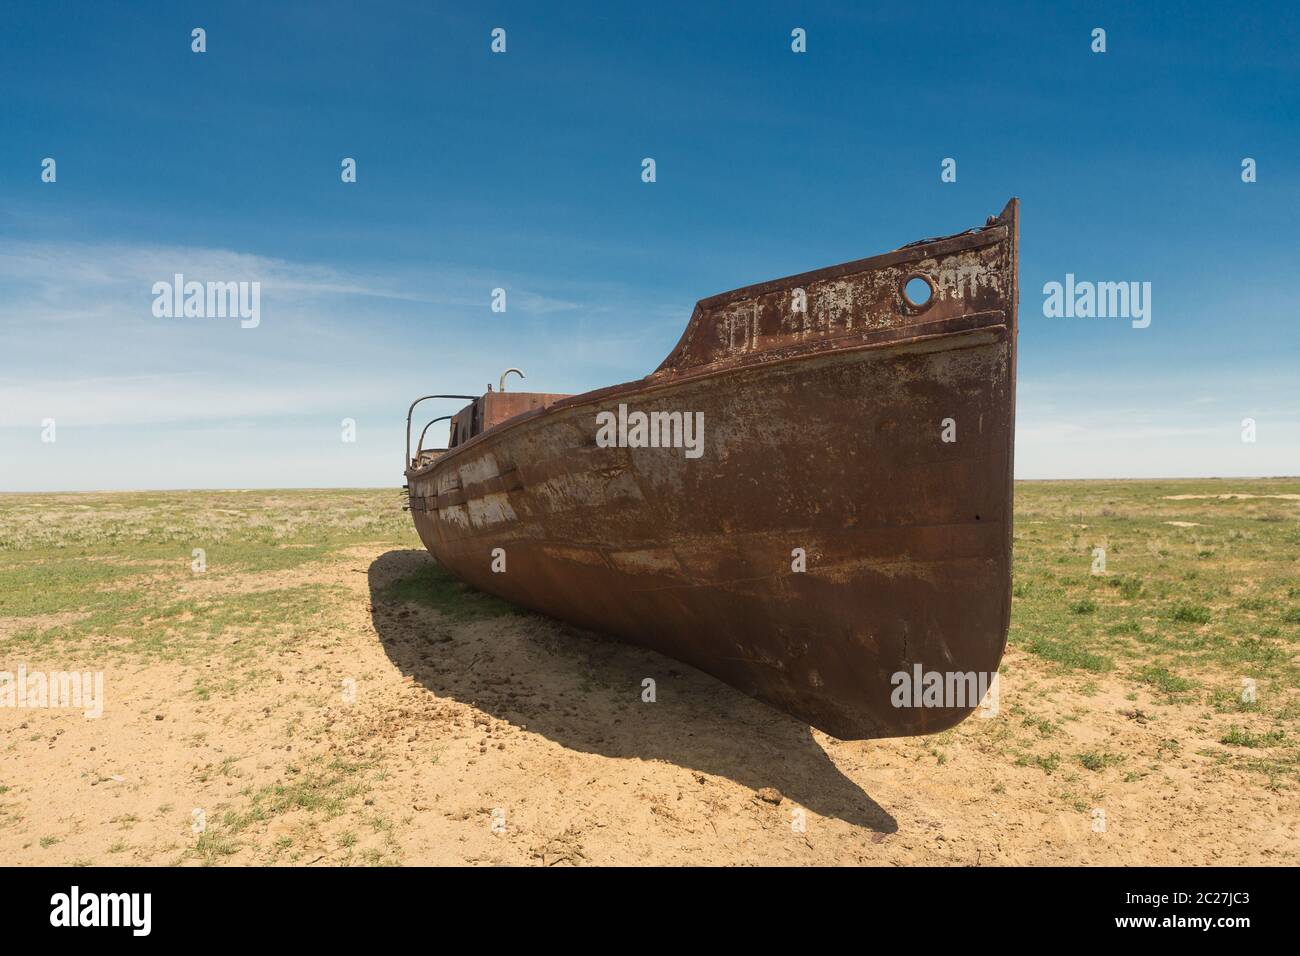 an old ship on land. at the bottom of the dried Aral sea Stock Photo